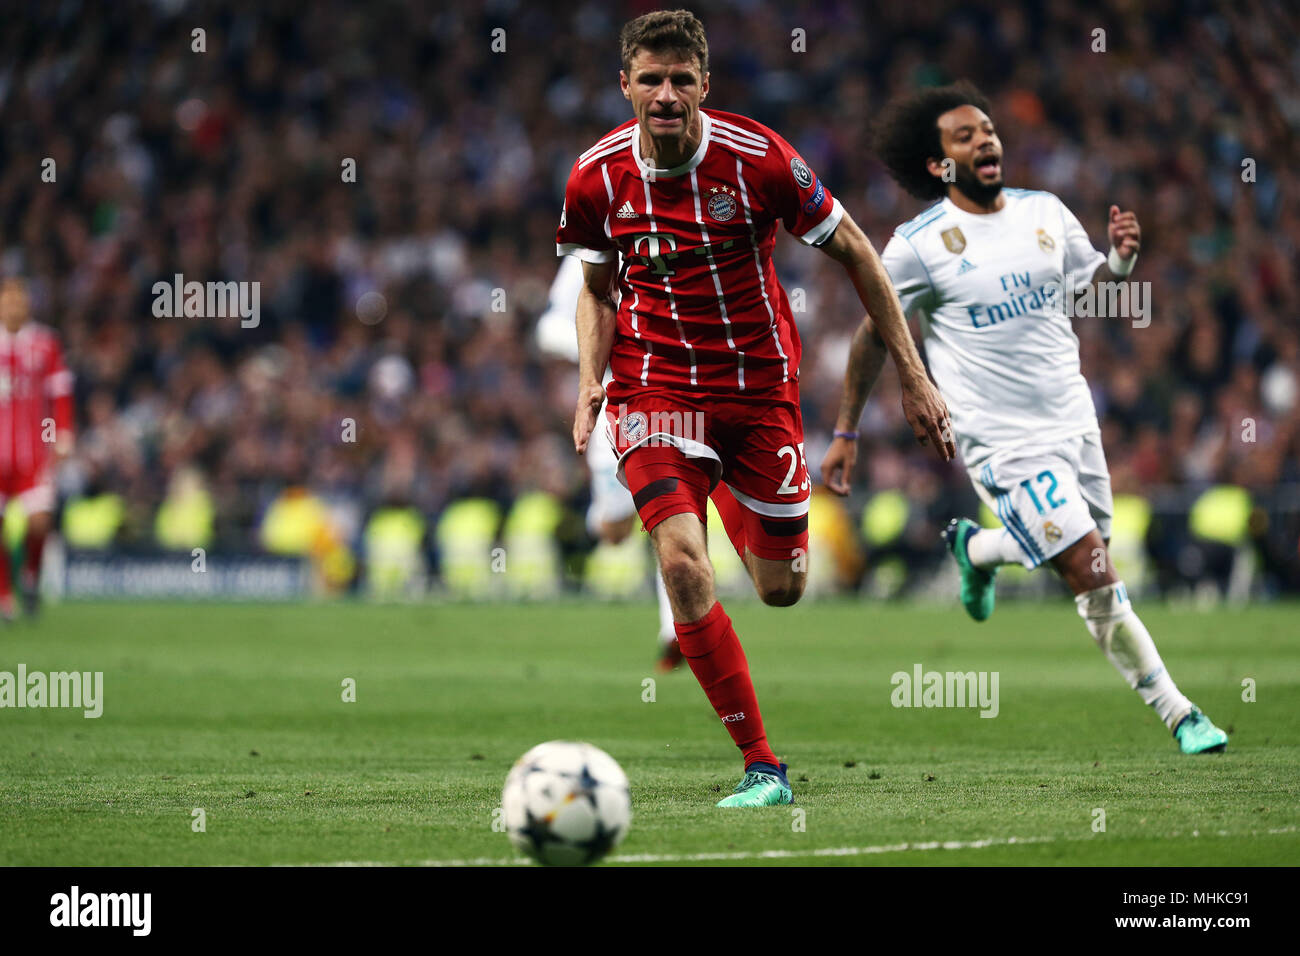 Madrid, Spain. 1st May, 2018. Thomas Muller (Bayern Munchen) in action during the UEFA Champions League Semi Final Second Leg match between Real Madrid and Bayern Munchen at the Santiago Bernabeu.Final Score Credit: Manu Reino/SOPA Images/ZUMA Wire/Alamy Live News Stock Photo